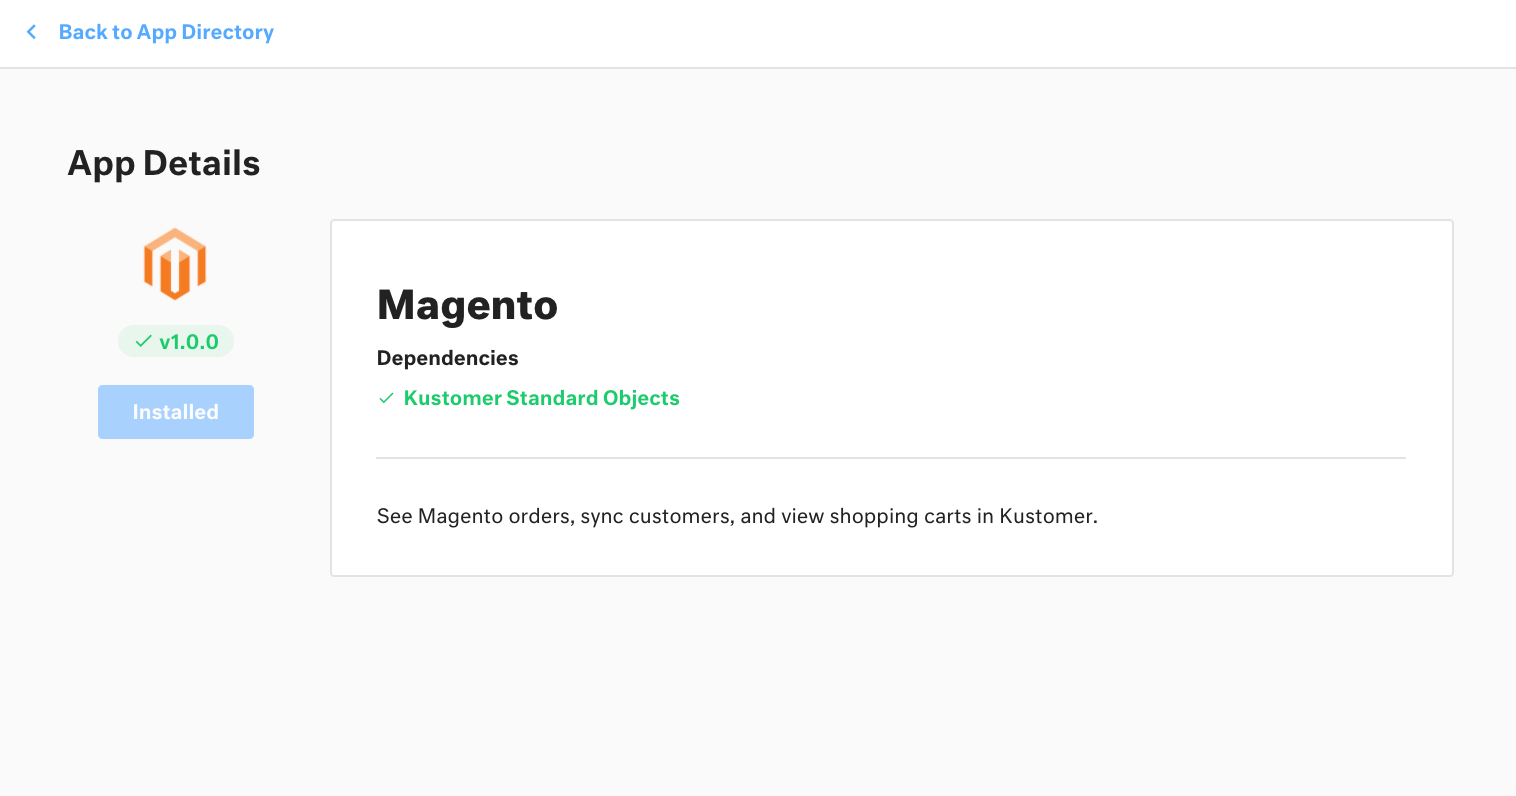 App details page for the Magento app with app title, dependencies, and description.